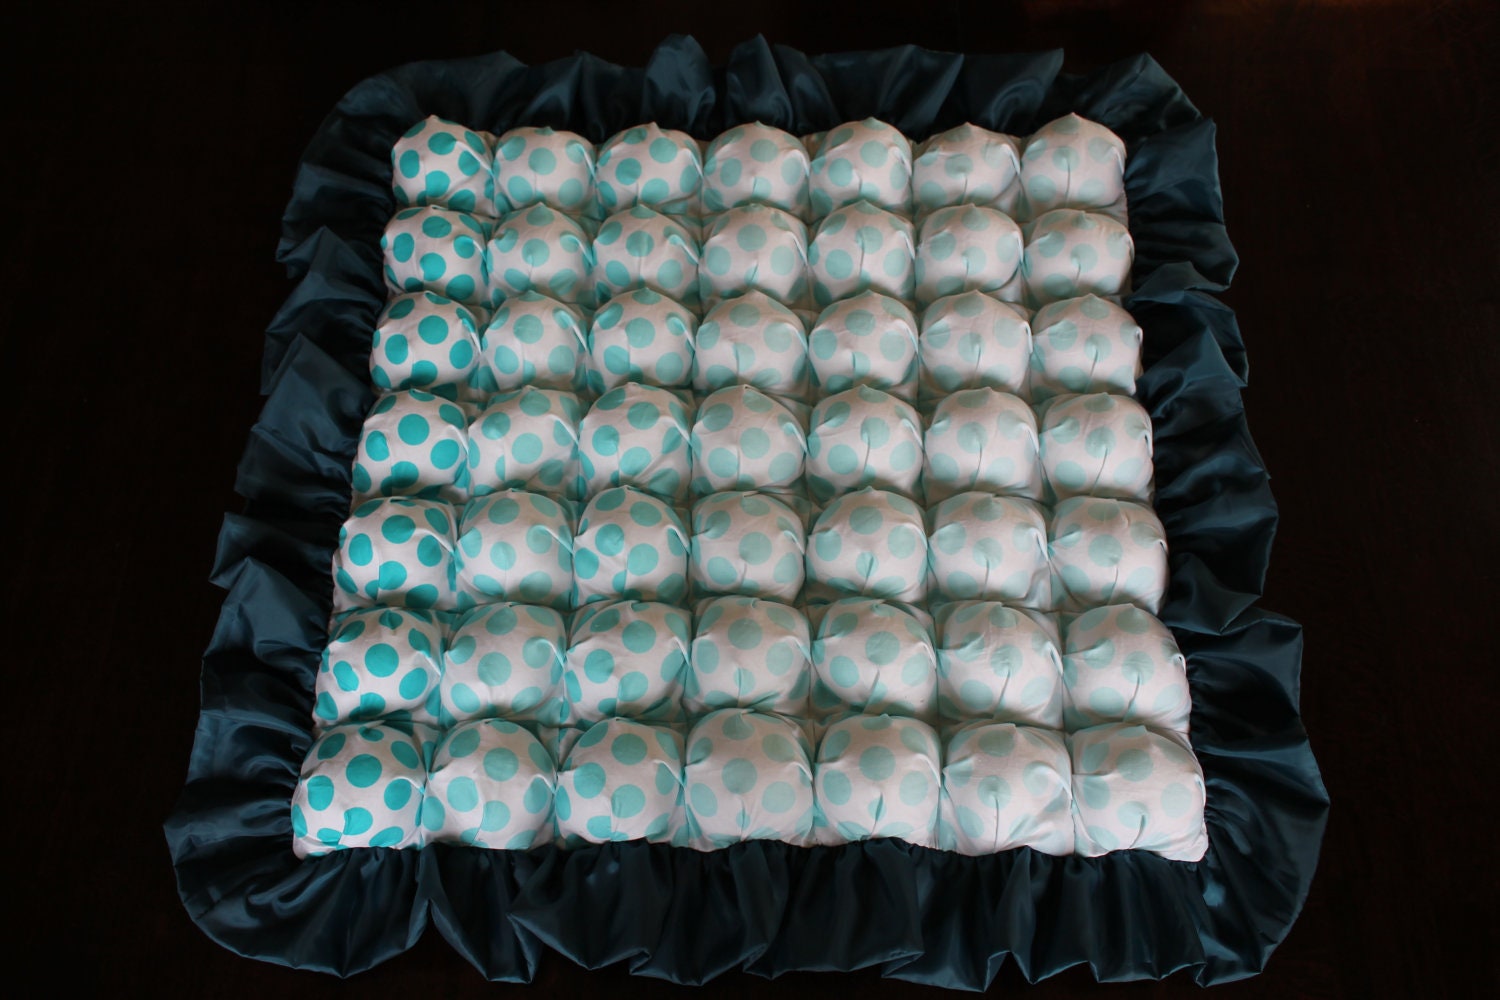 Bubble Blanket - Biscuit Quilt - Ombre Dots - Turquoise and White Bubble Baby Blanket with Dark Teal Ruffle and Grey Backing - Ready to Ship